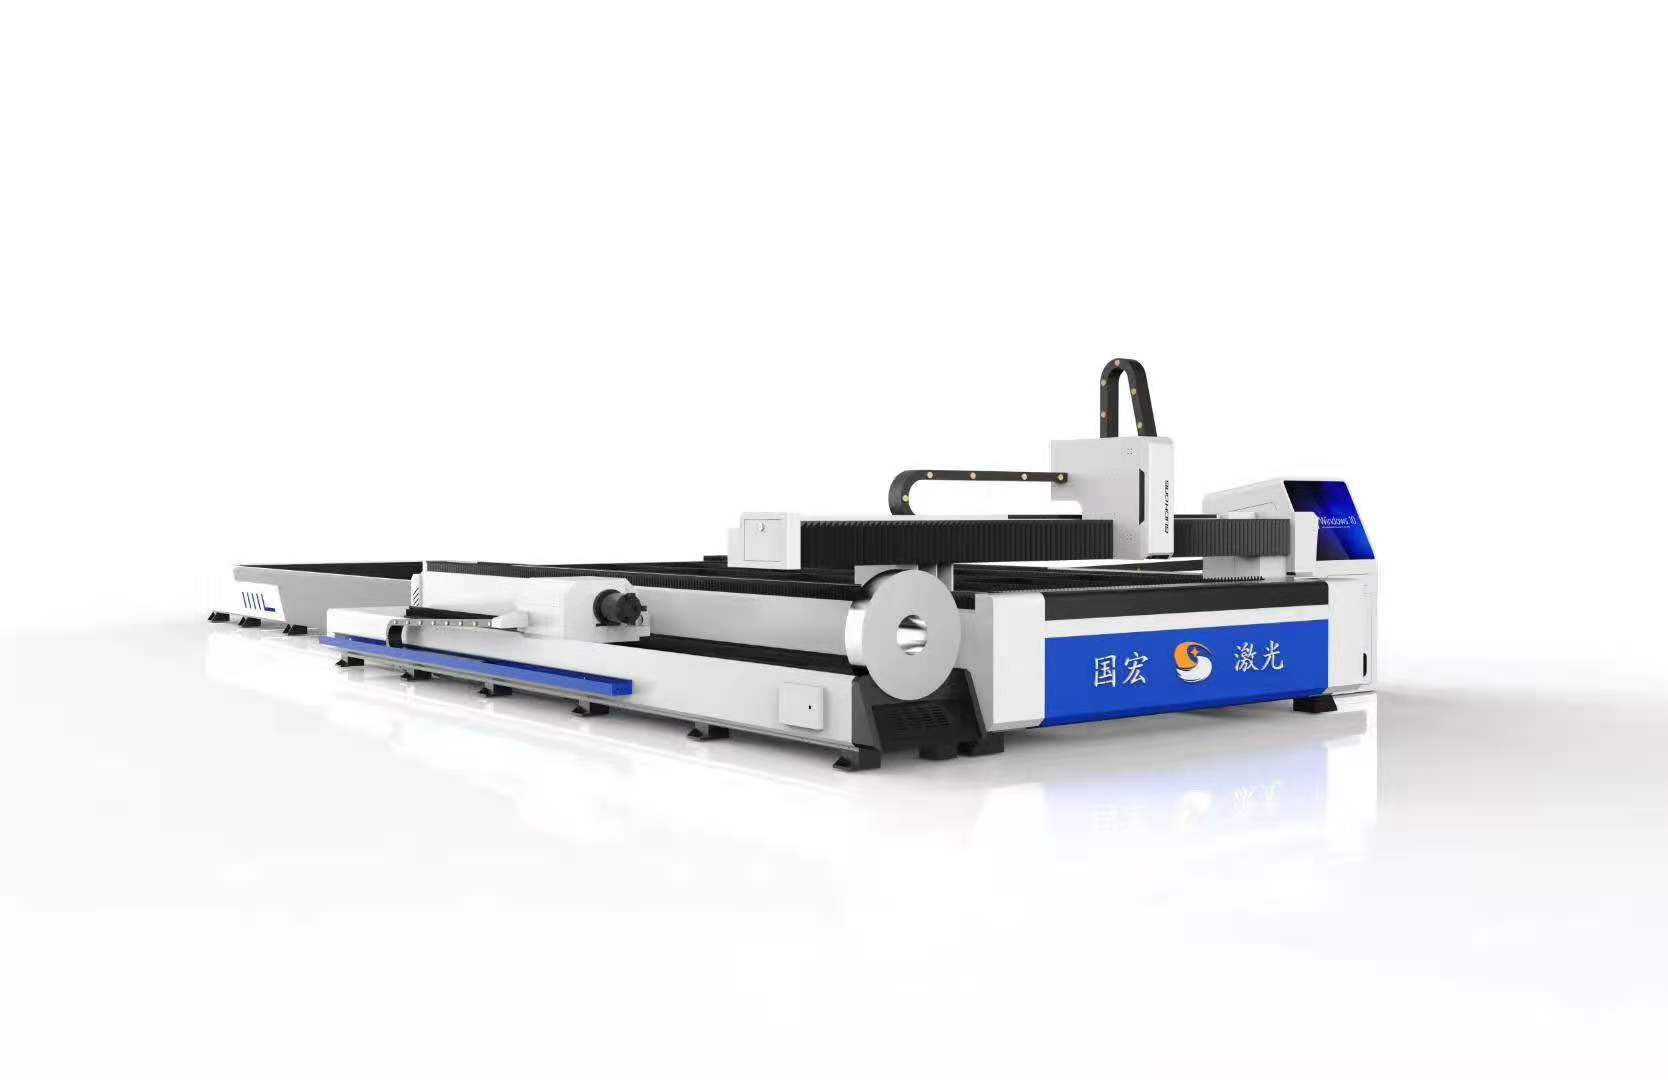 Buy fiber laser cutters without losing money, how long can you return the book